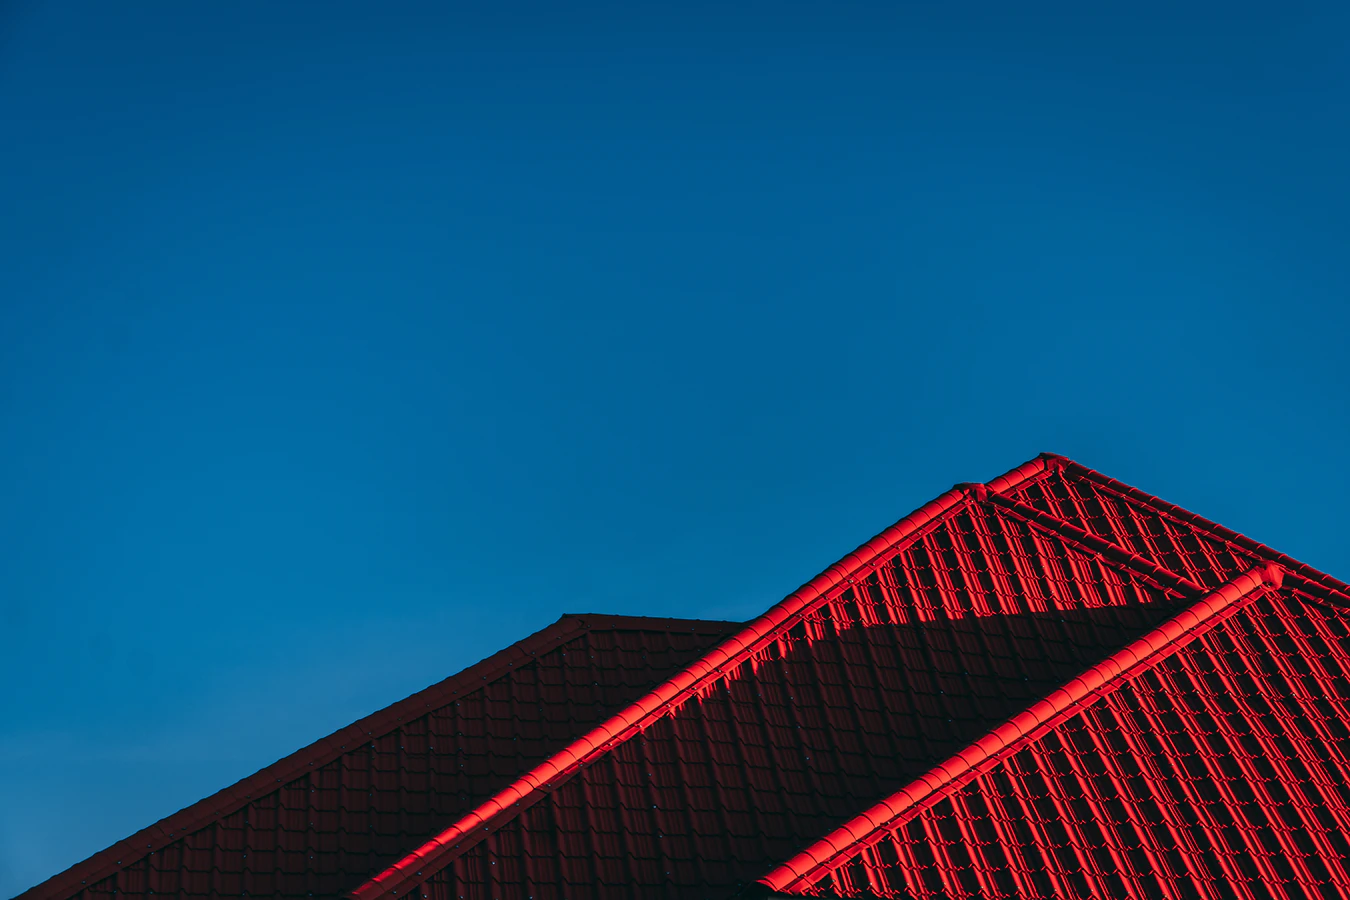 a blue sky with red tiles on the roof of a house renovation project